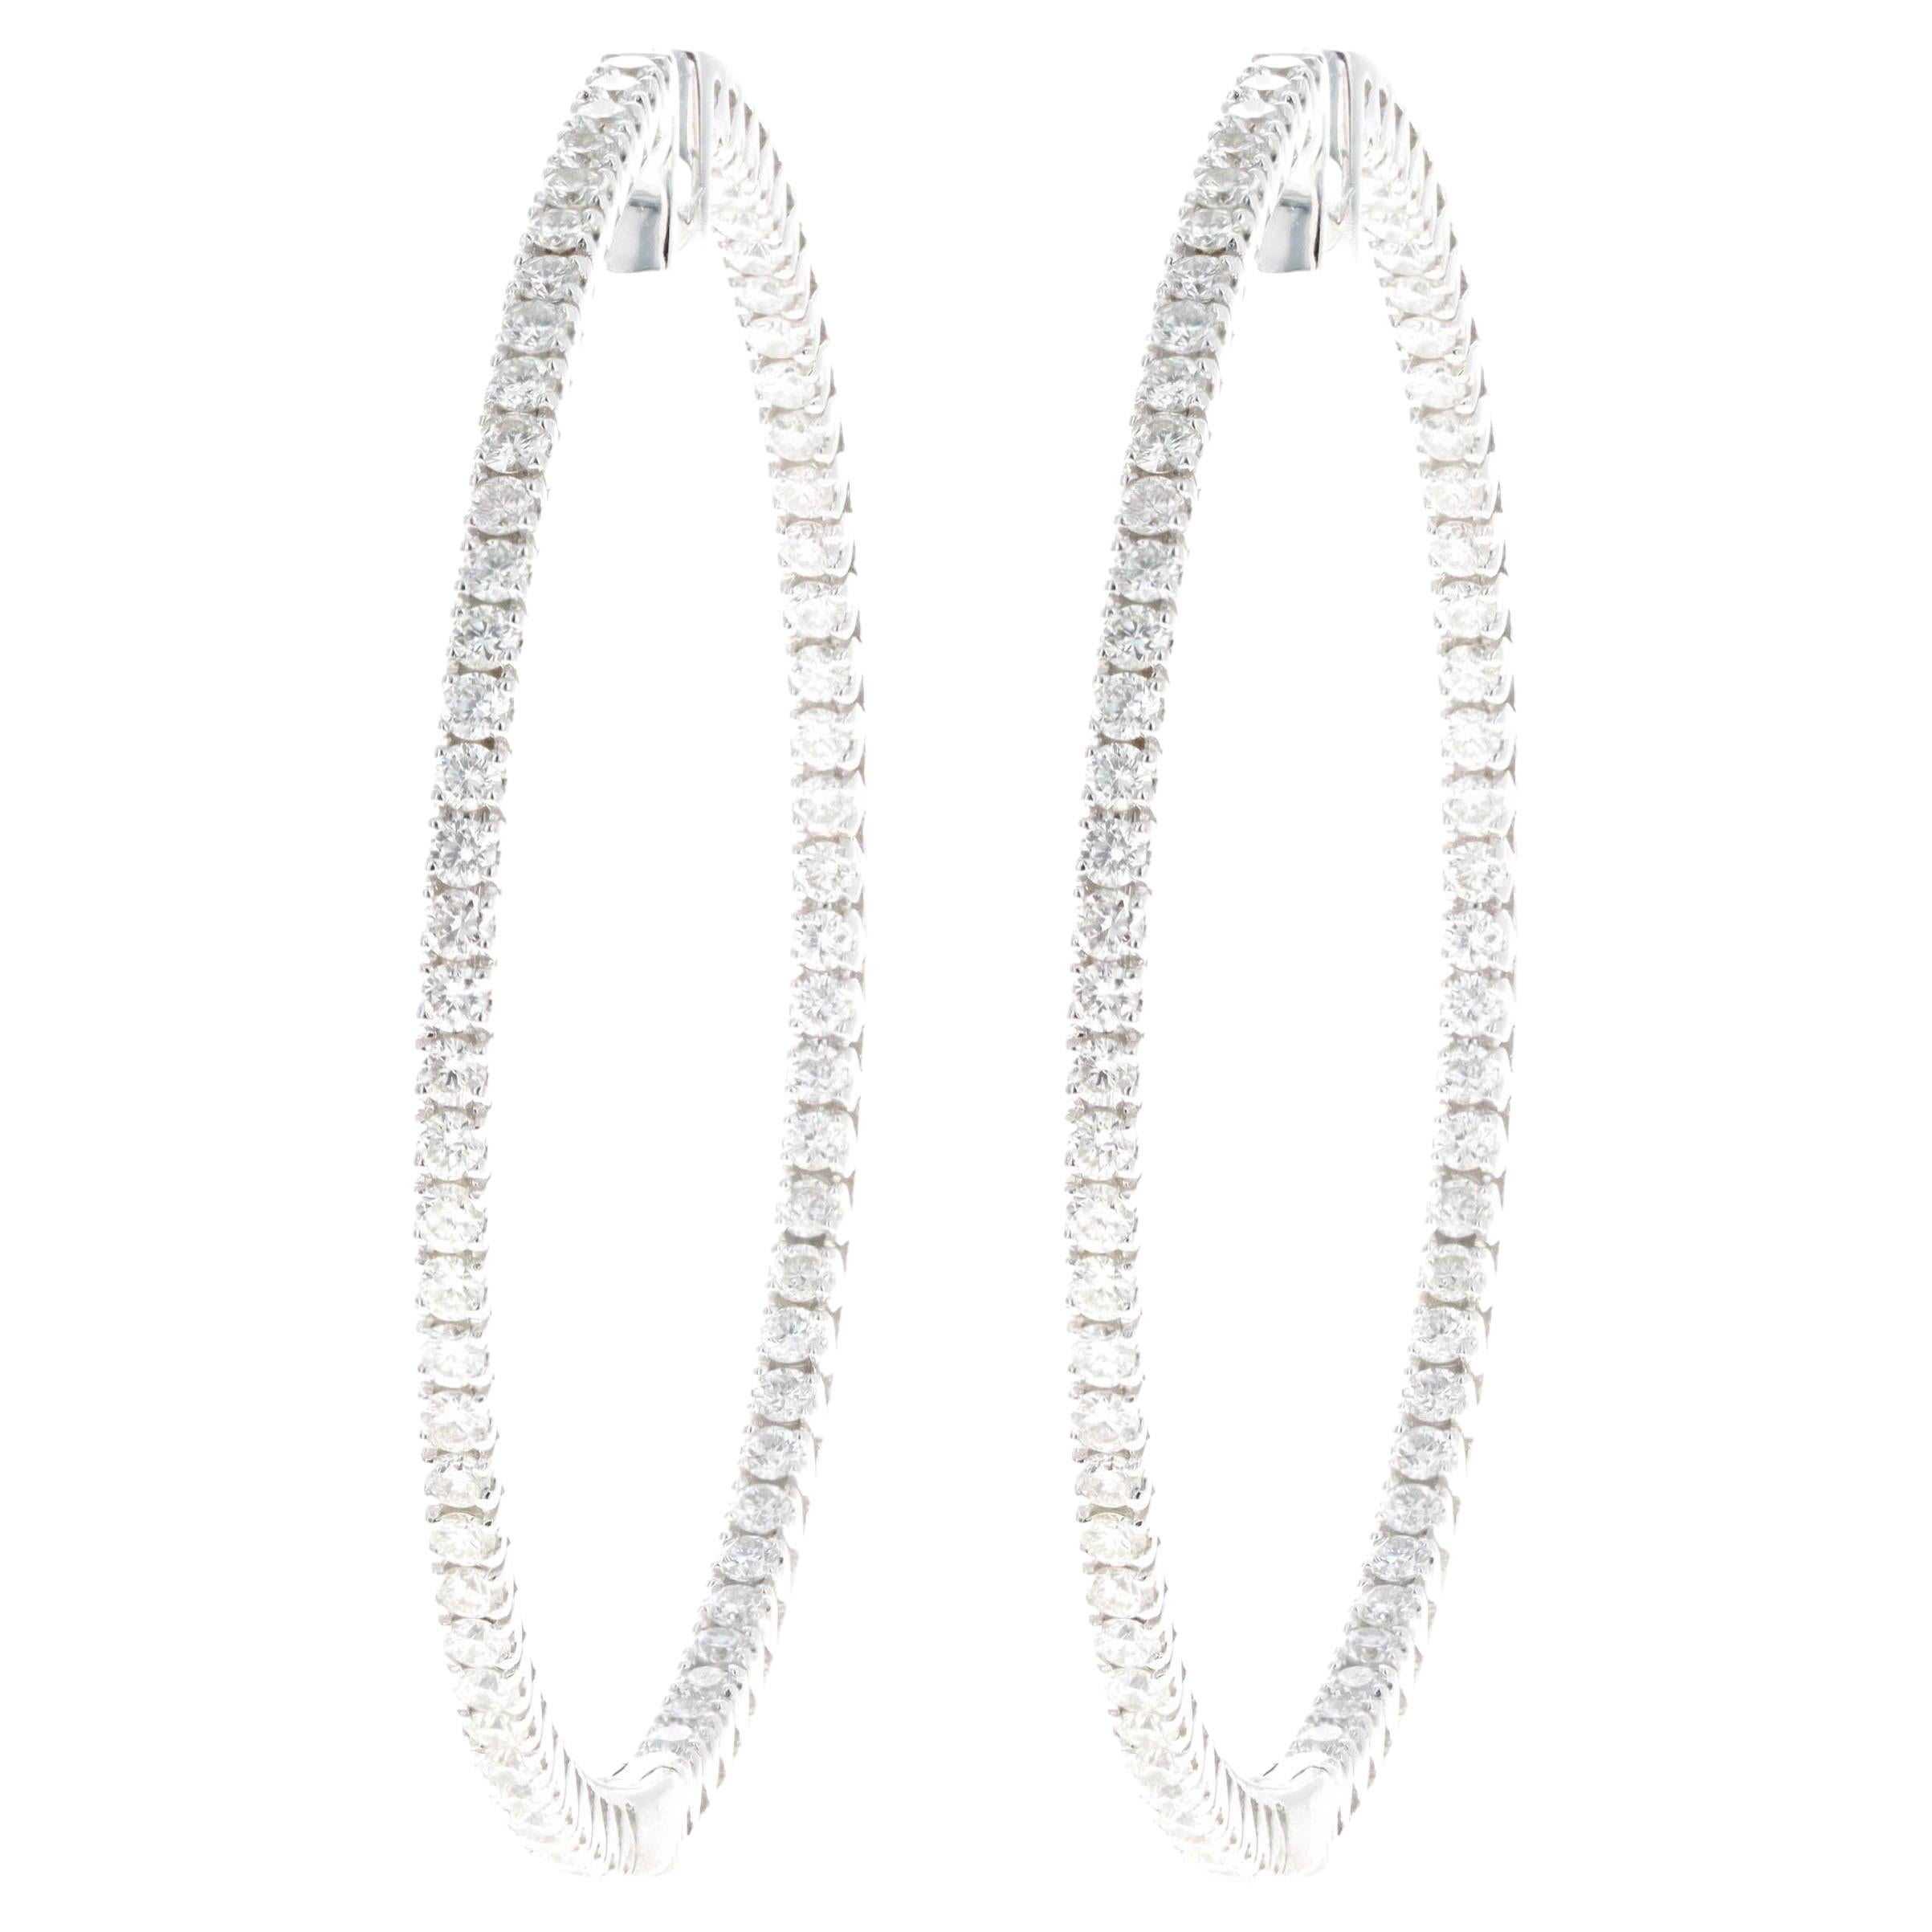 18K White Gold 2.2 Carat Total Weight Diamond Inside-Out Hoop Earrings